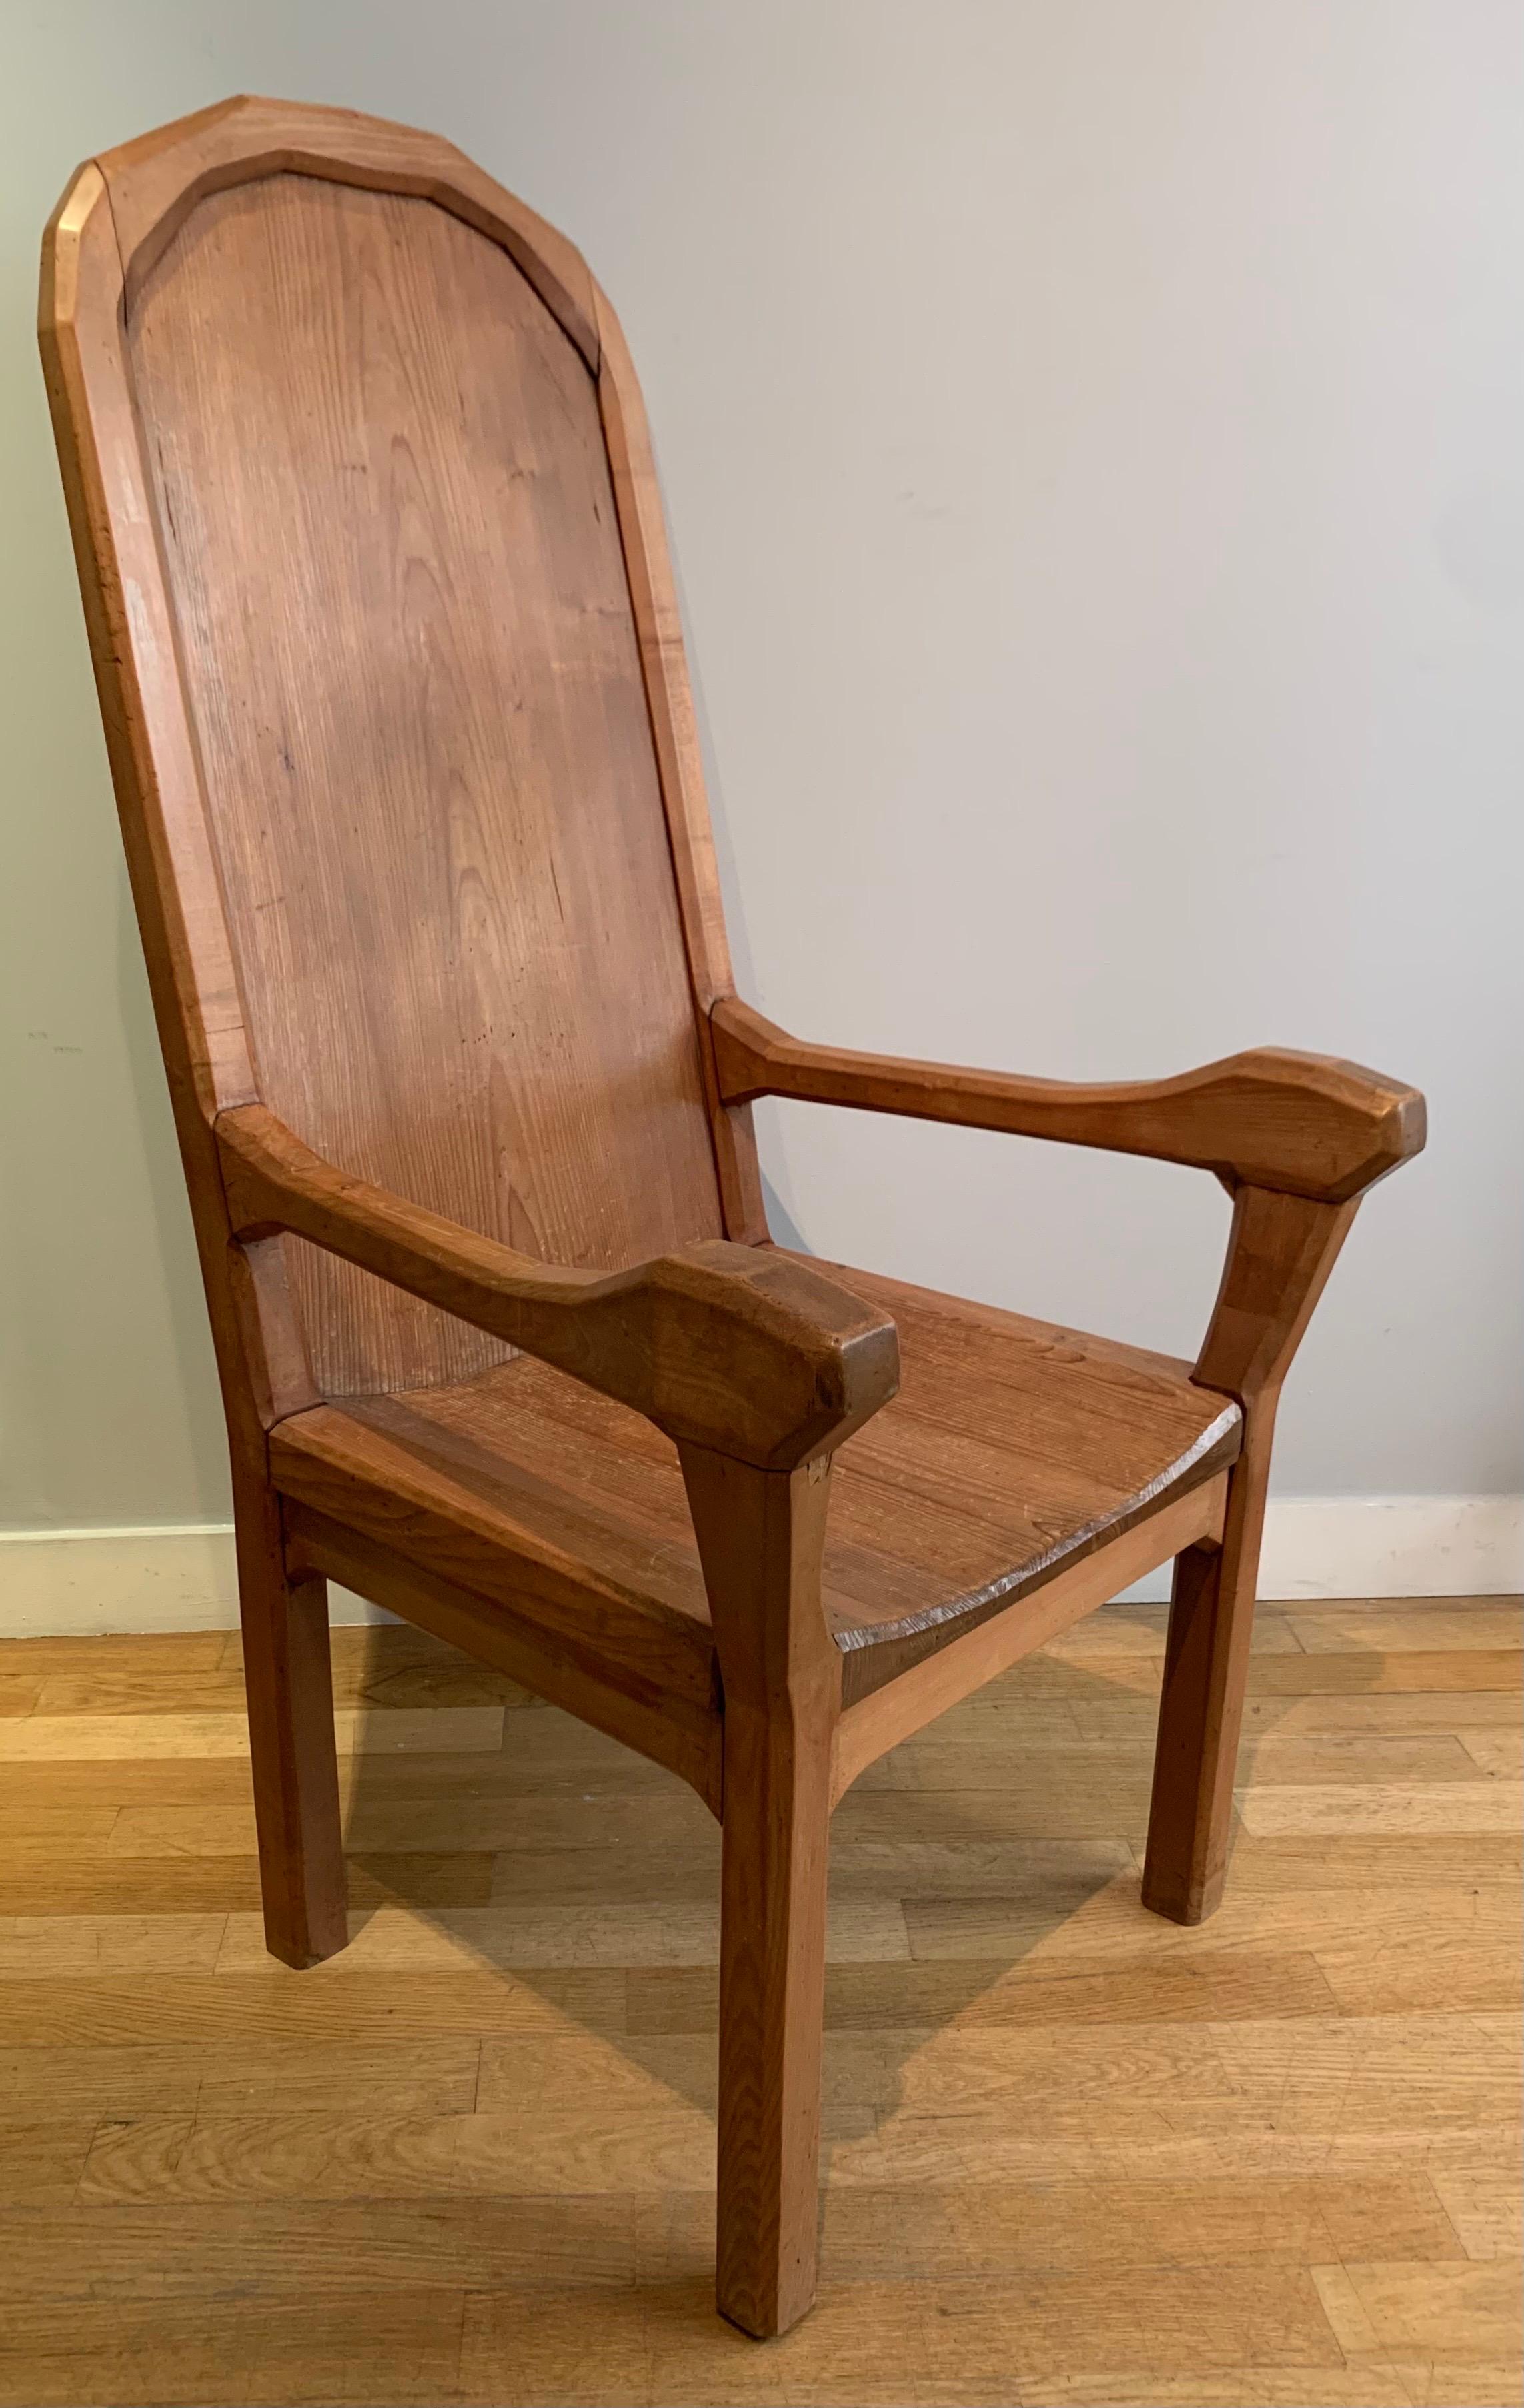 Anthroposophicalmeditation armchair in cherry wood and pine wood 1920’s period. 
Rudolf Steiner school
Switzerland
Dornach design
Handle designed specifically for the position of the fingers
The armchair was upholstered in fabric or leither on pine